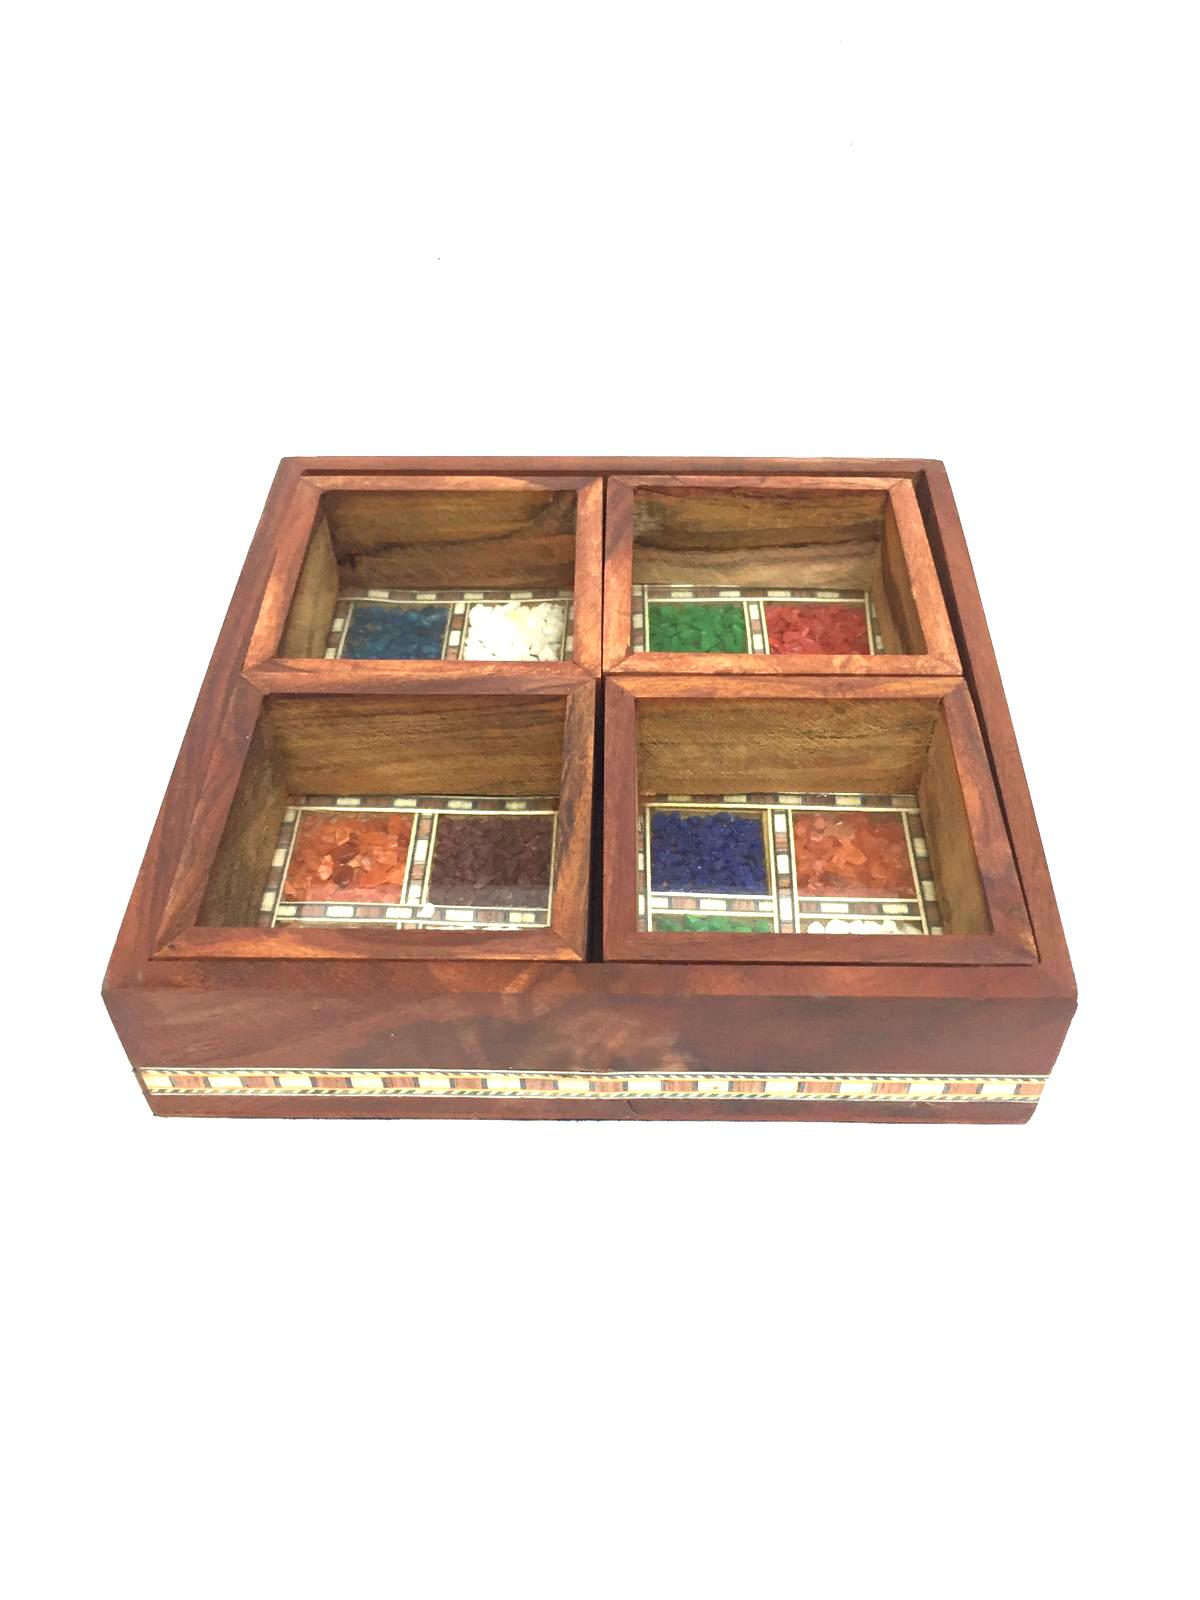 Wooden Platter Tray With Gemstones & 4 Compartments From Tamrapatra